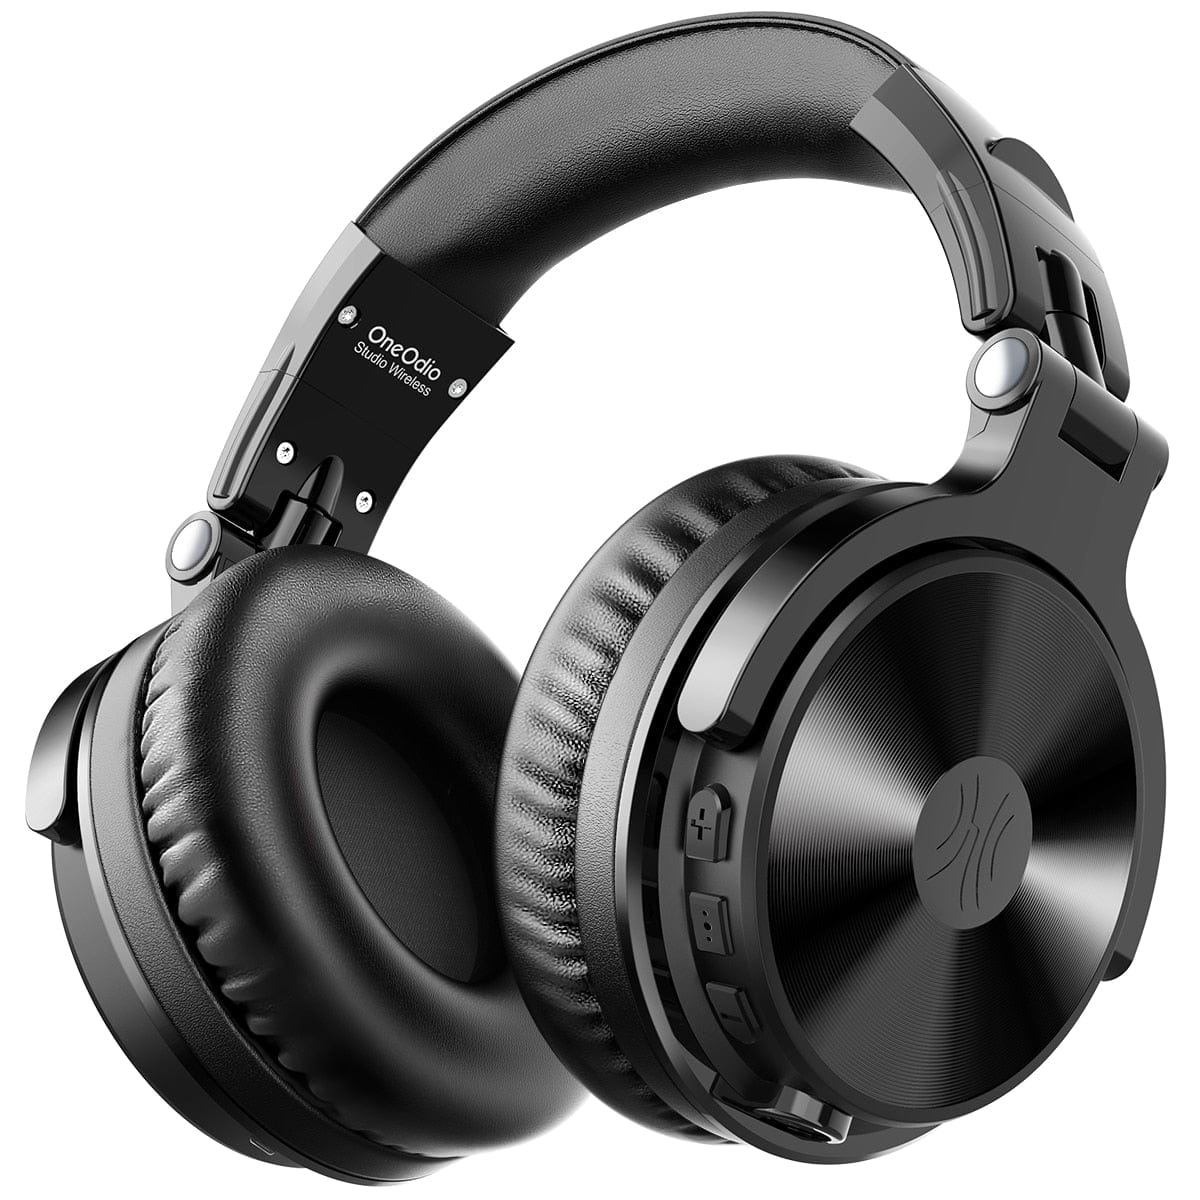 OneOdio OneOdio Wireless Headphone, Version Pro C, Supports Bluetooth 5.2, Playtime up to 110 Hours, Color Black